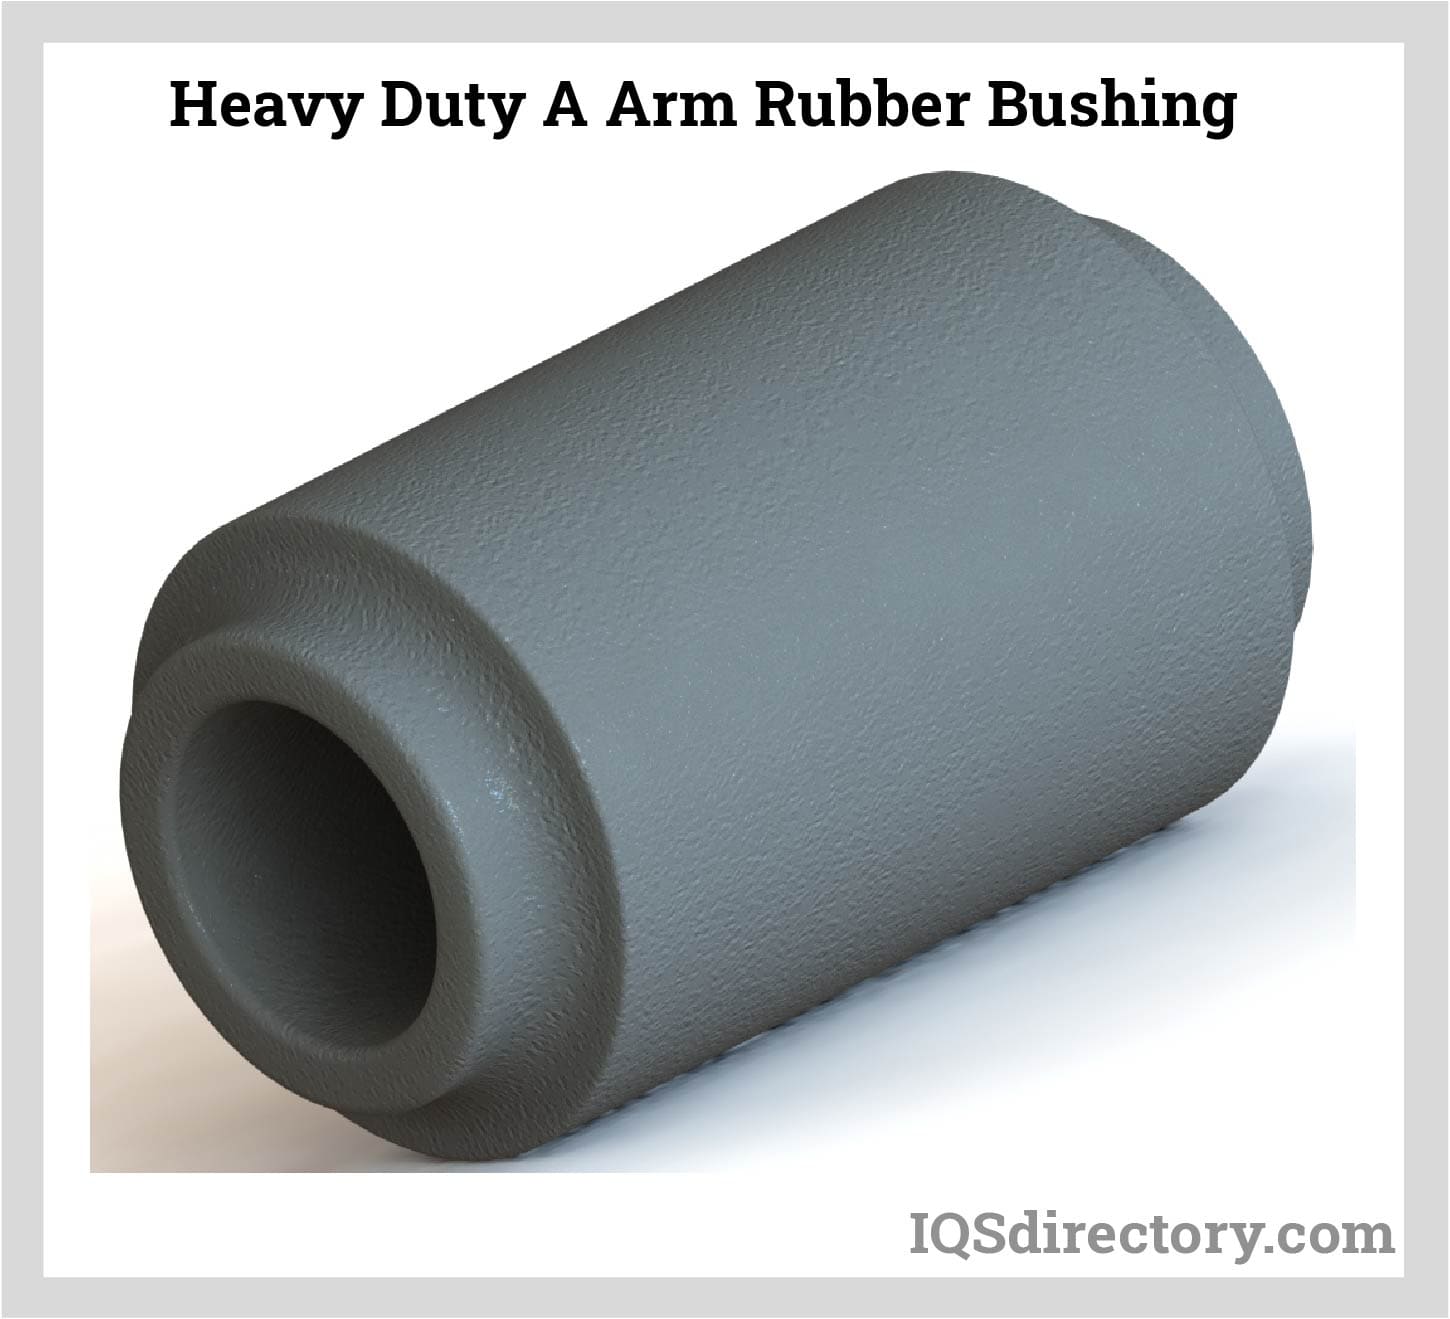 keten Auckland Tekstschrijver Rubber Bushings: Types, Uses, Manufacturing, and Materials